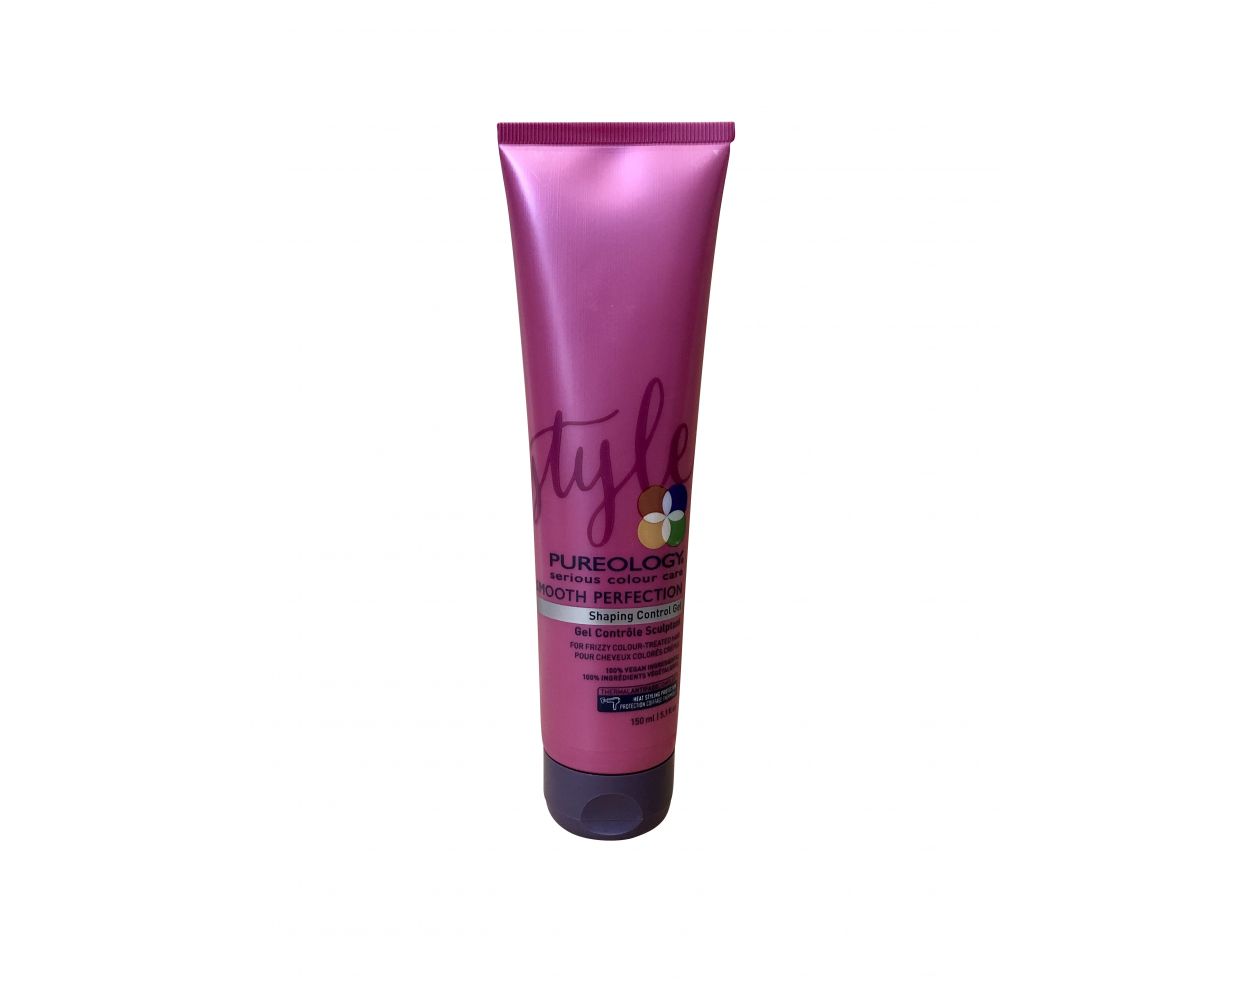 Pureology Smooth Perfection Shaping Control Gel 5.1 oz, 5.1 oz